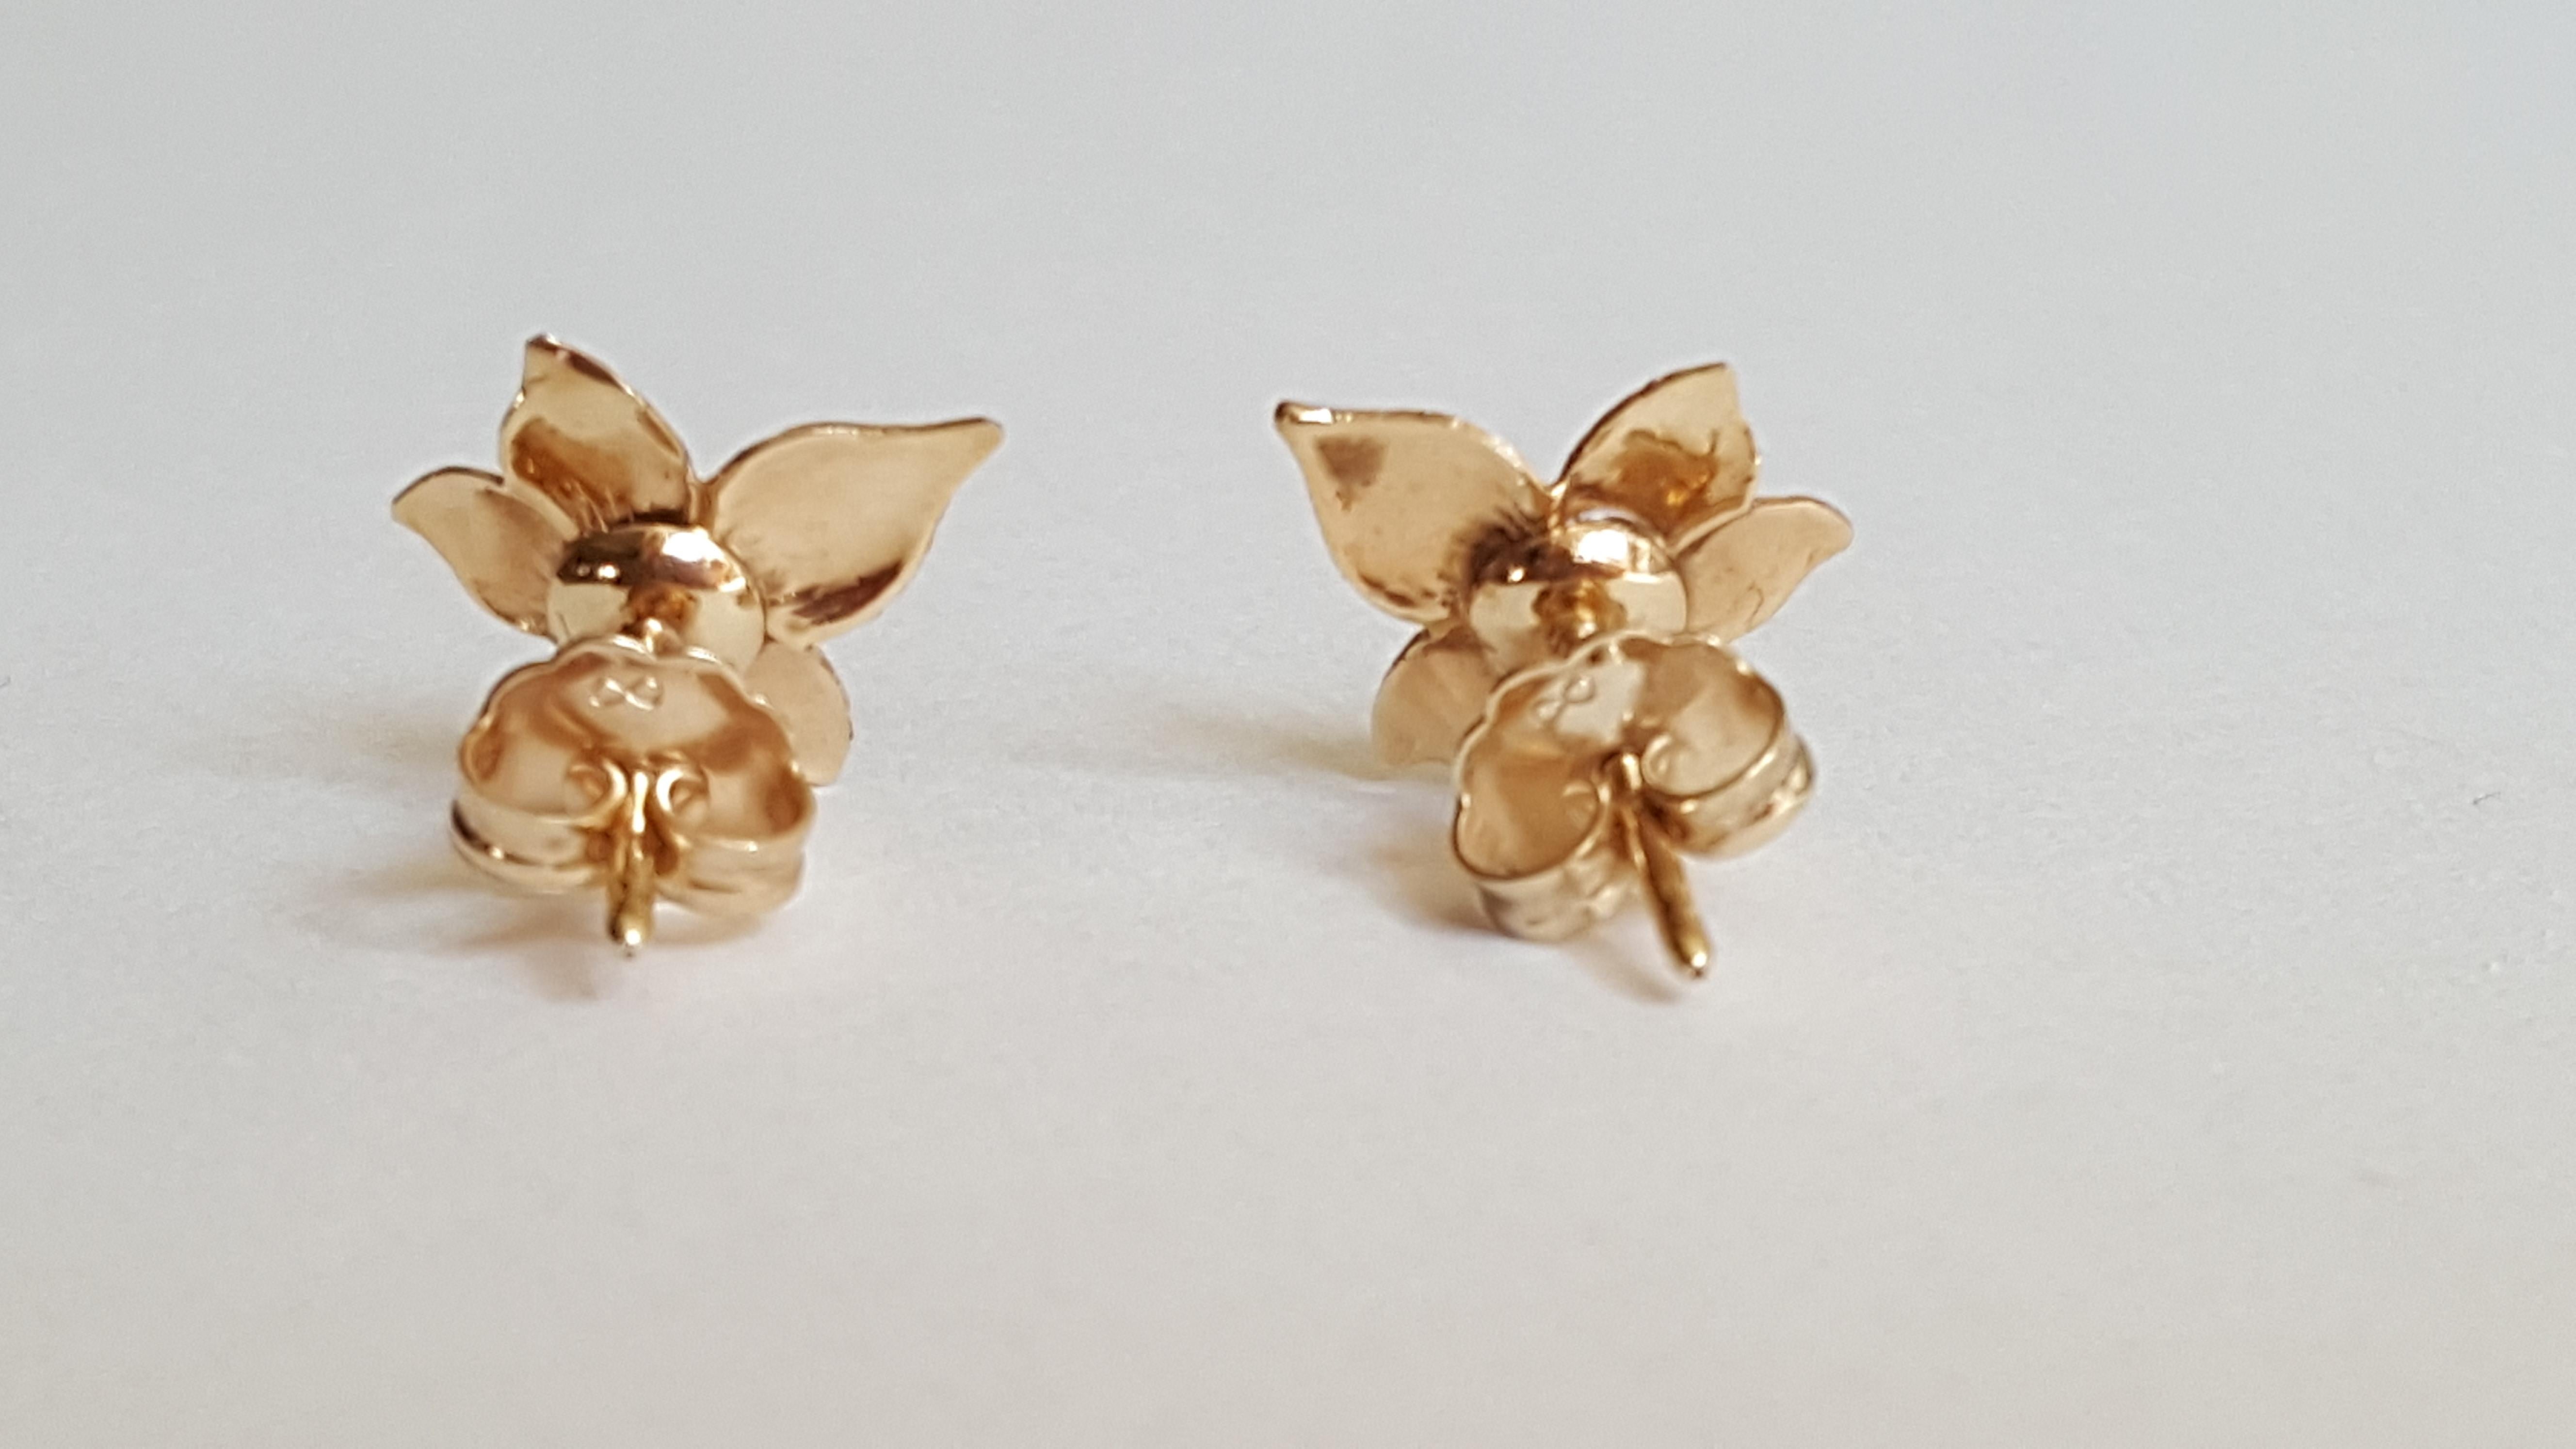 14kt Yellow Gold Diamond Earrings, Floral Leaf Design, Friction Post & Push-on Backing, 2 Diamonds of .04cttw, 12mm x 11mm Size, 1.2 Grams. These are beautifully detailed leaf design in the shape of a flower. 

Please let us know if you  have any